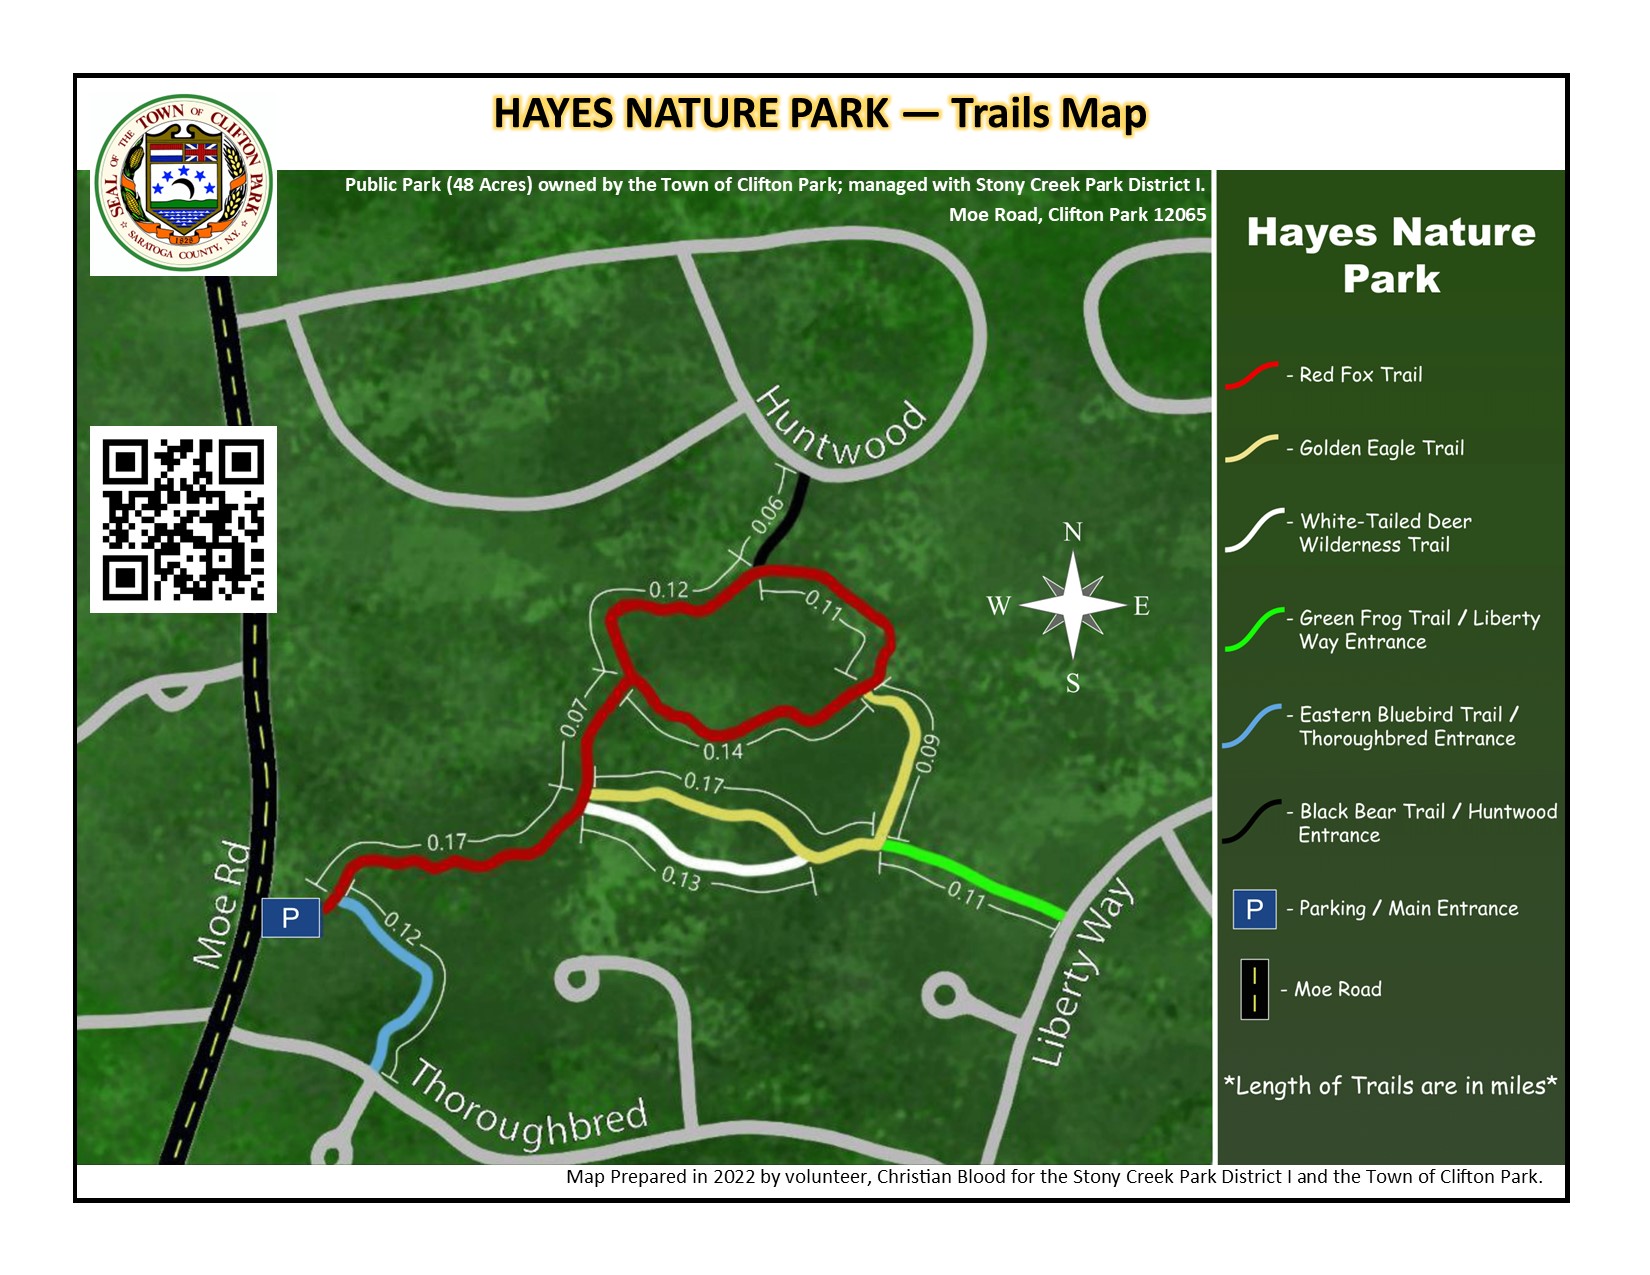 Hayes Nature Park 2022 Map by Christian Blood volunteer with QR Code